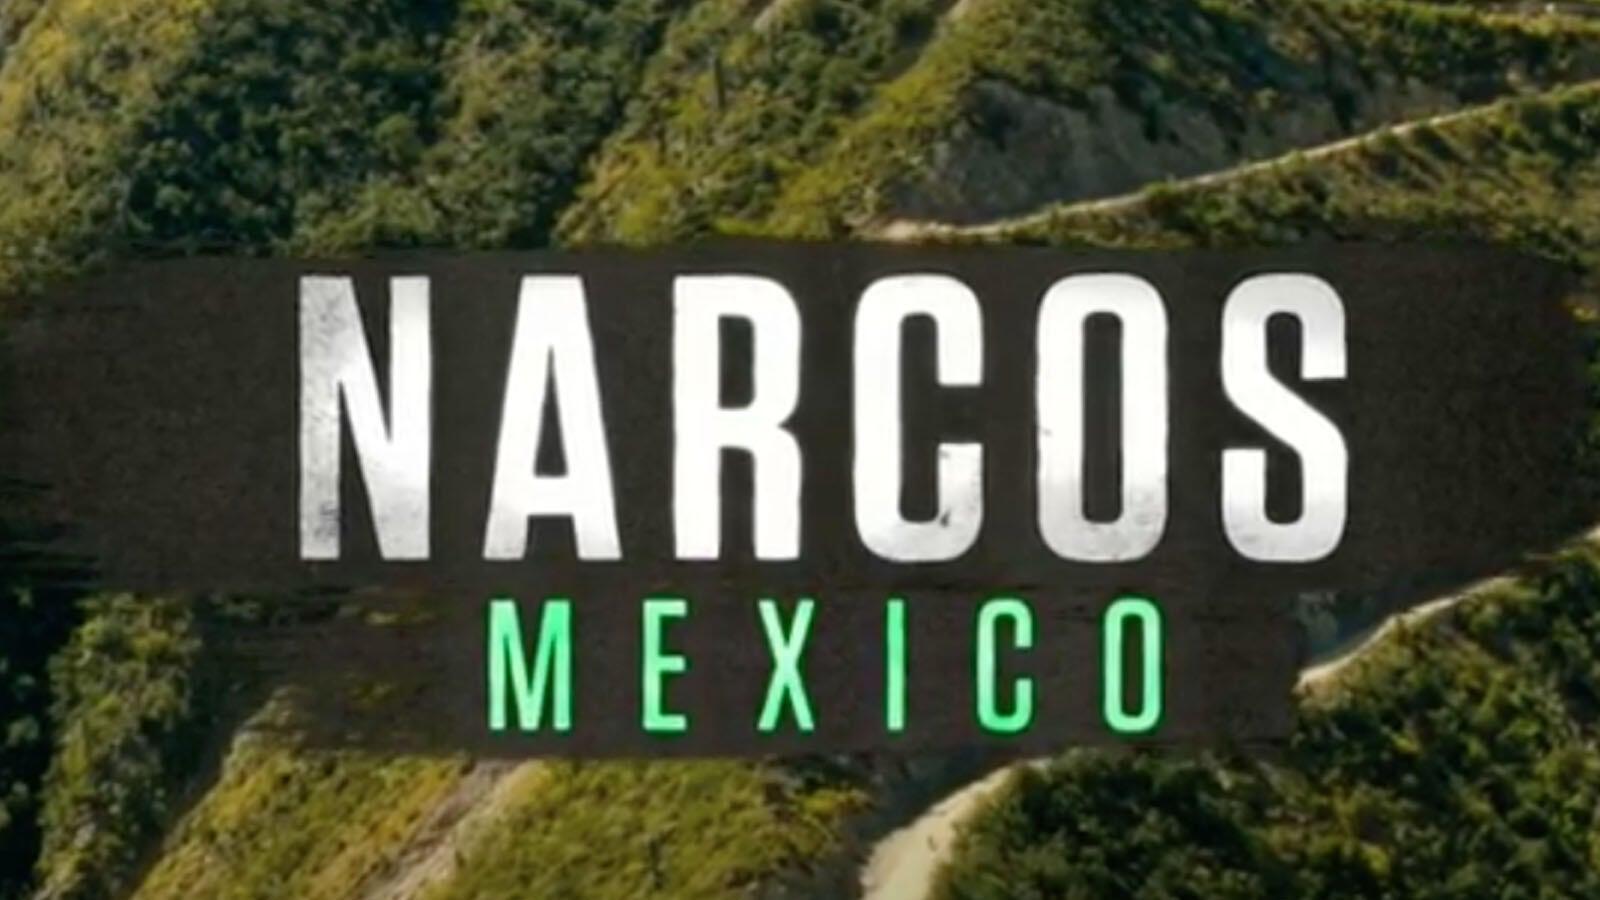 Narcos: Mexico Season 2 is Coming in February